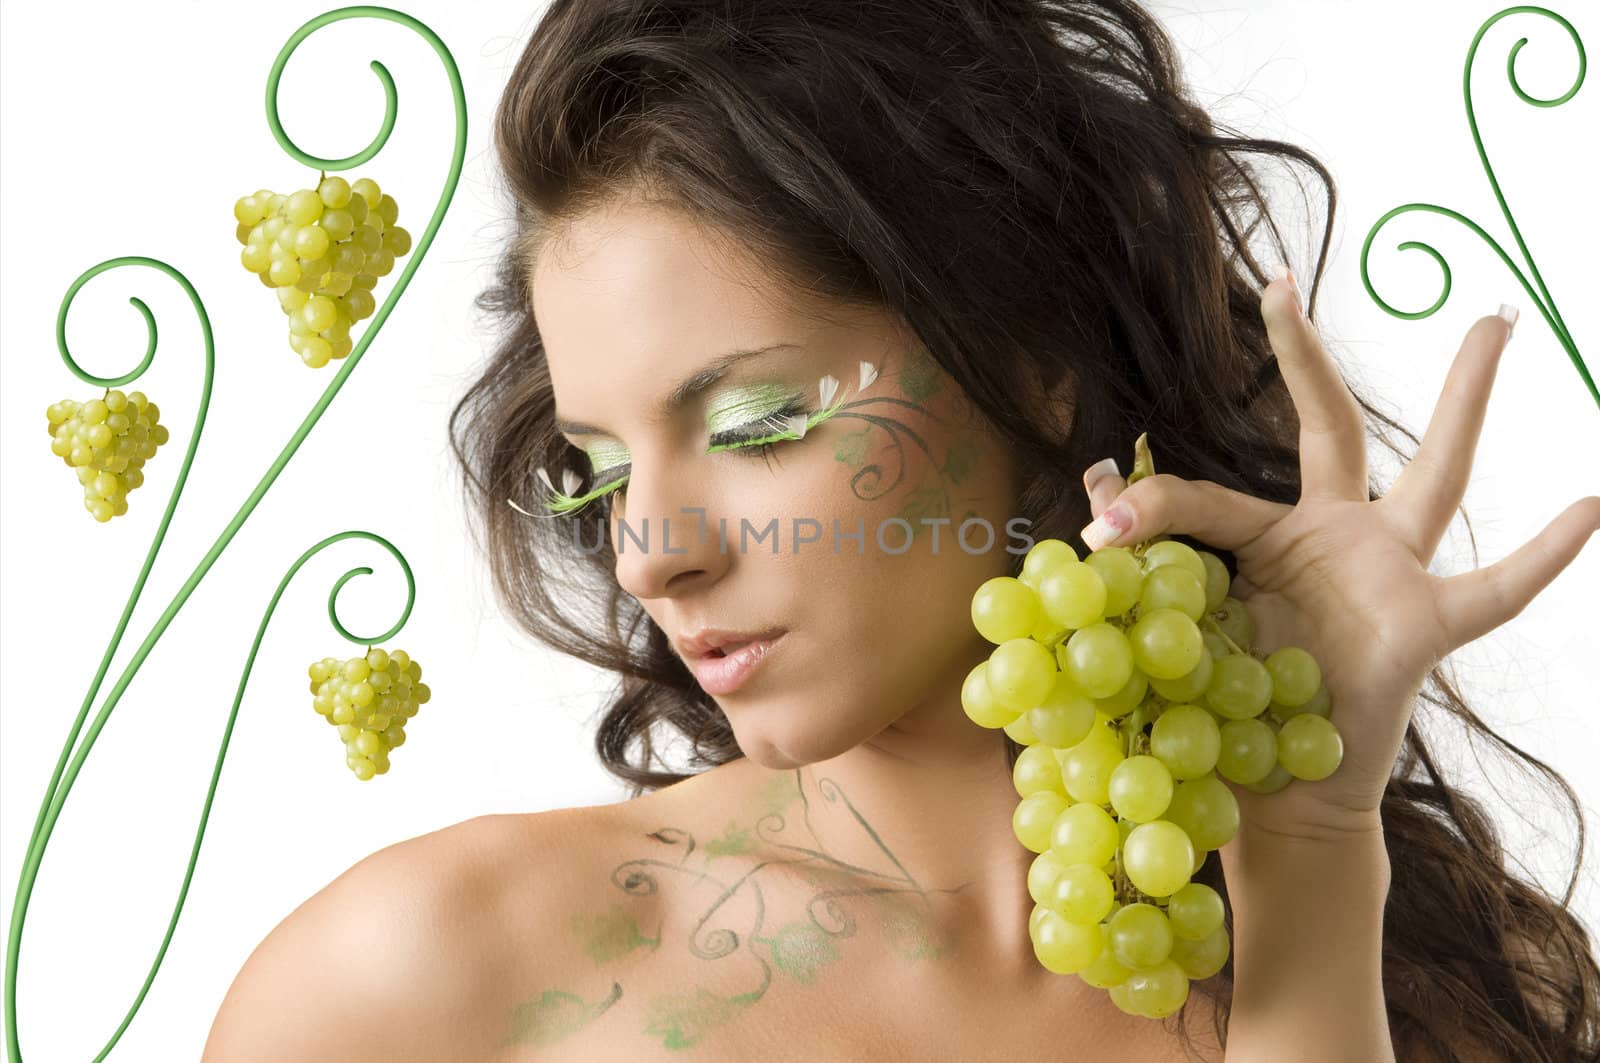 pretty girl with bodypaint on shoulder and face looking down with grape